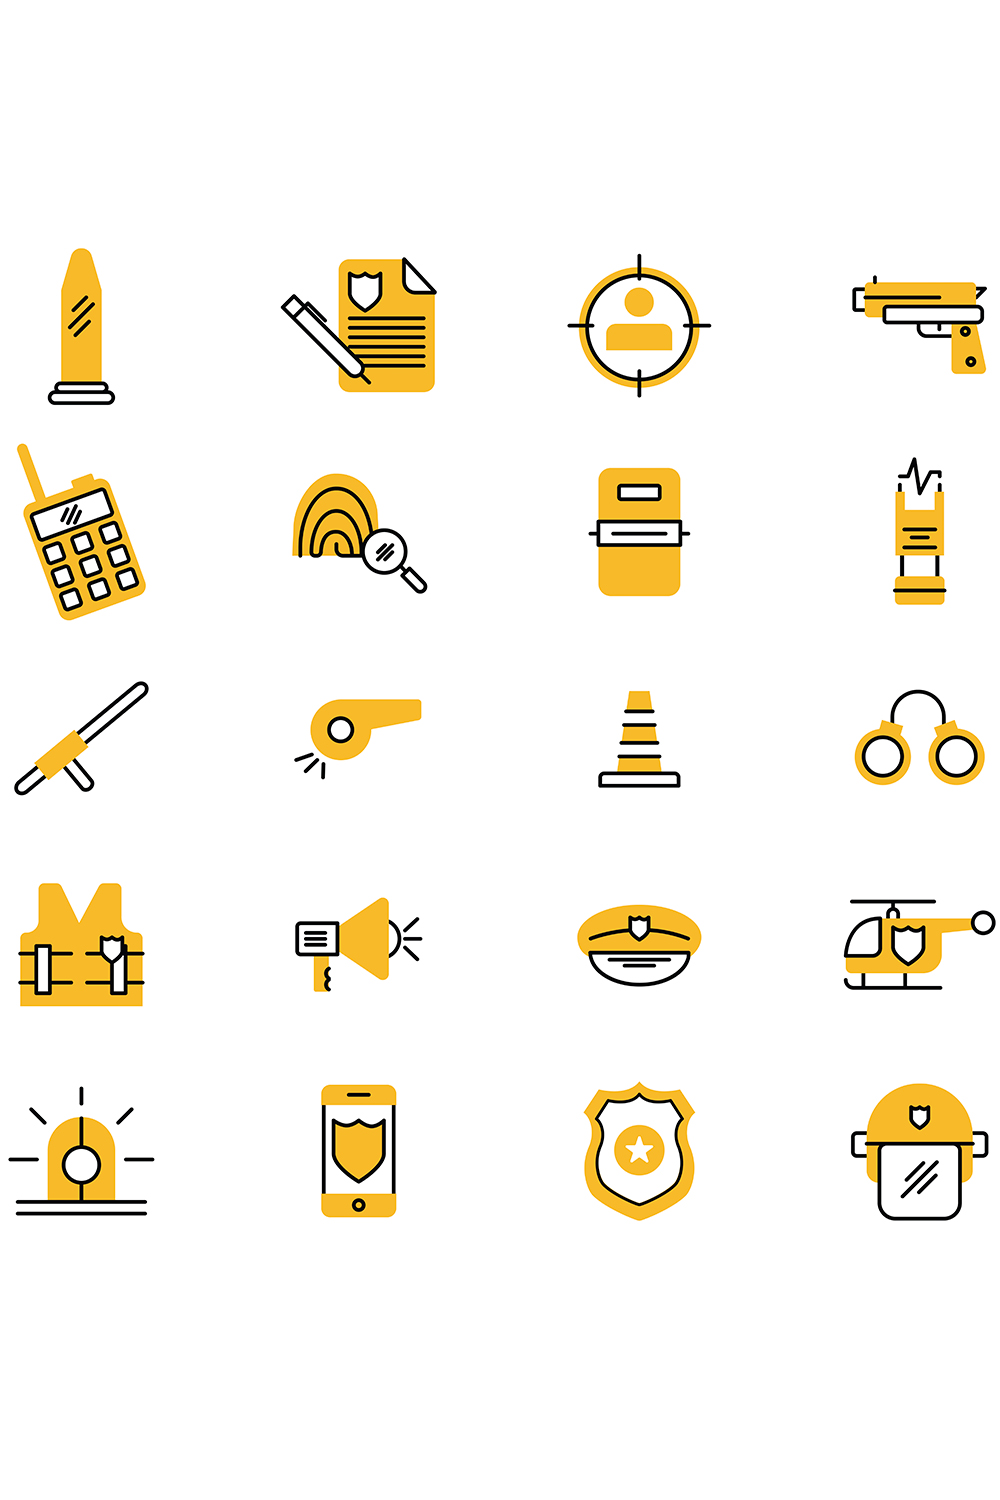 Set of yellow and black icons on a white background.